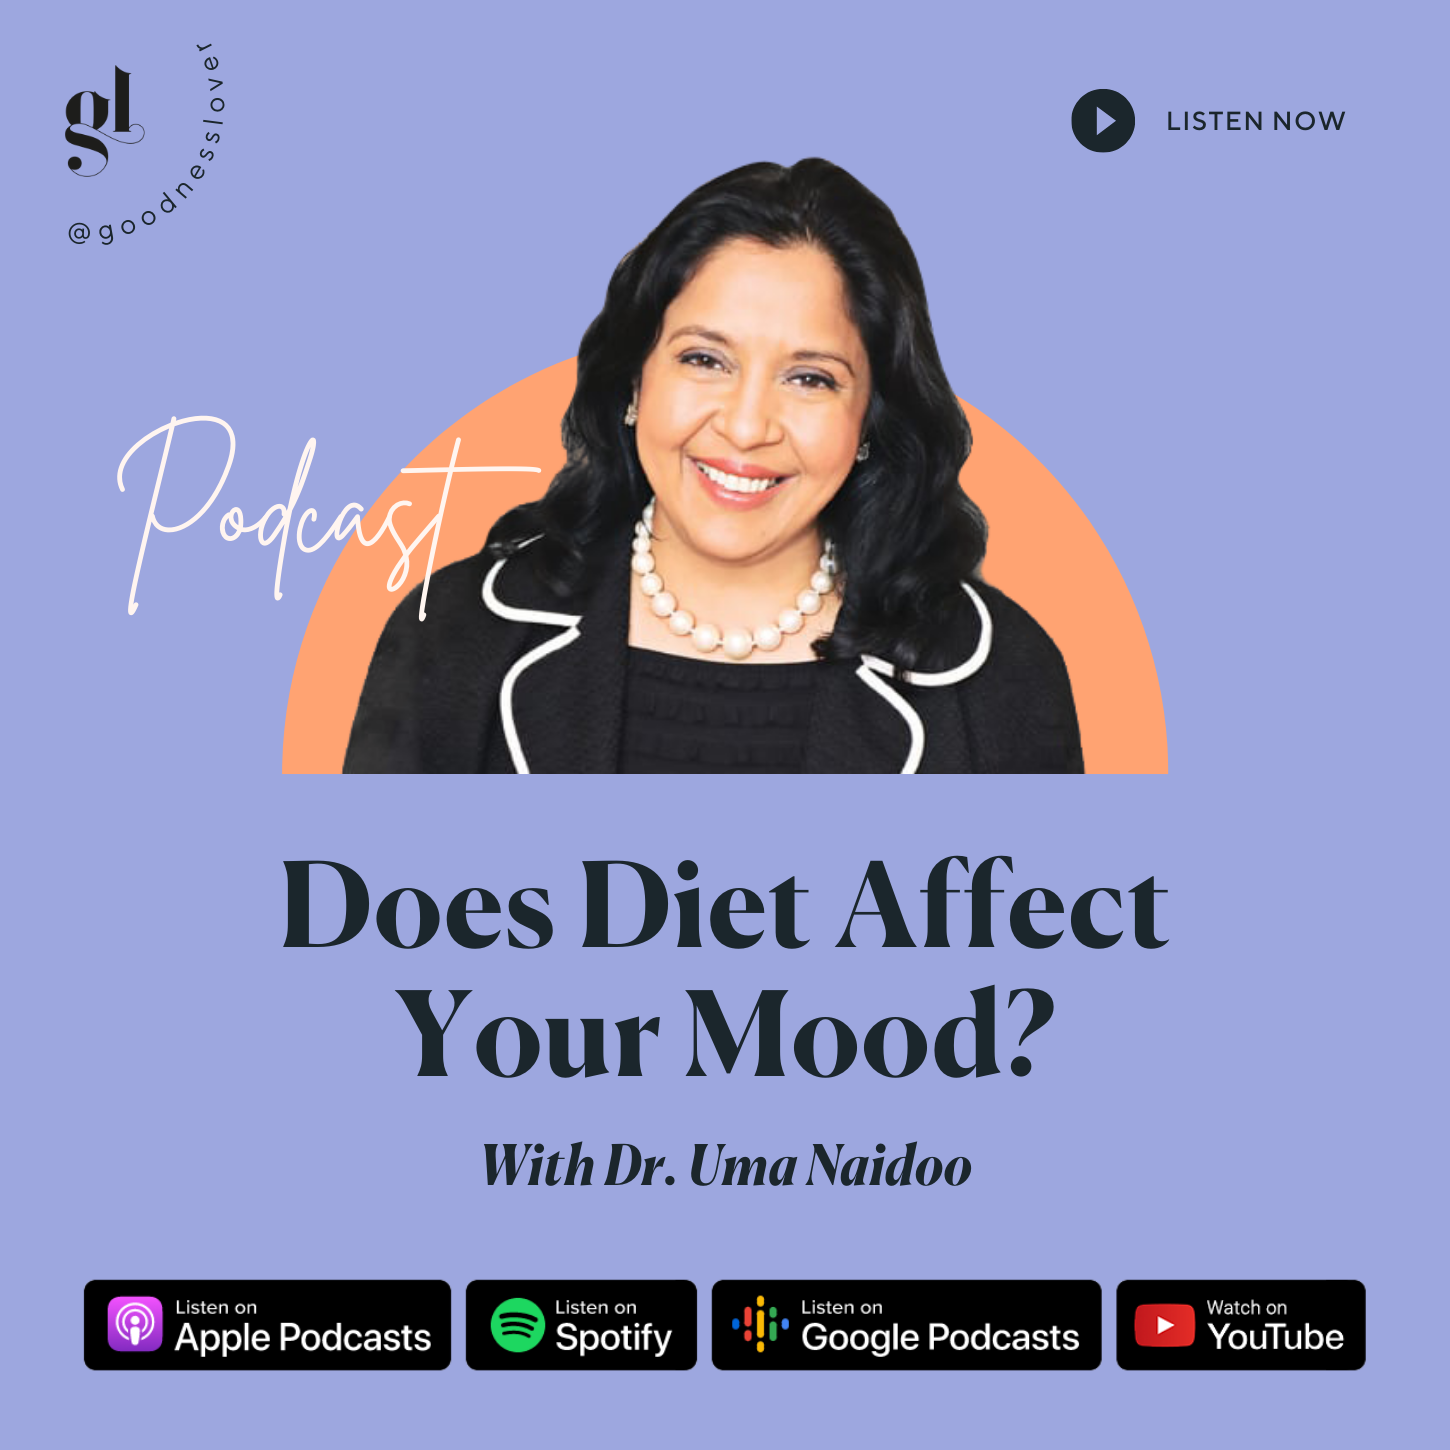 Does Diet Affect Your Mood? | Dr. Uma Naidoo